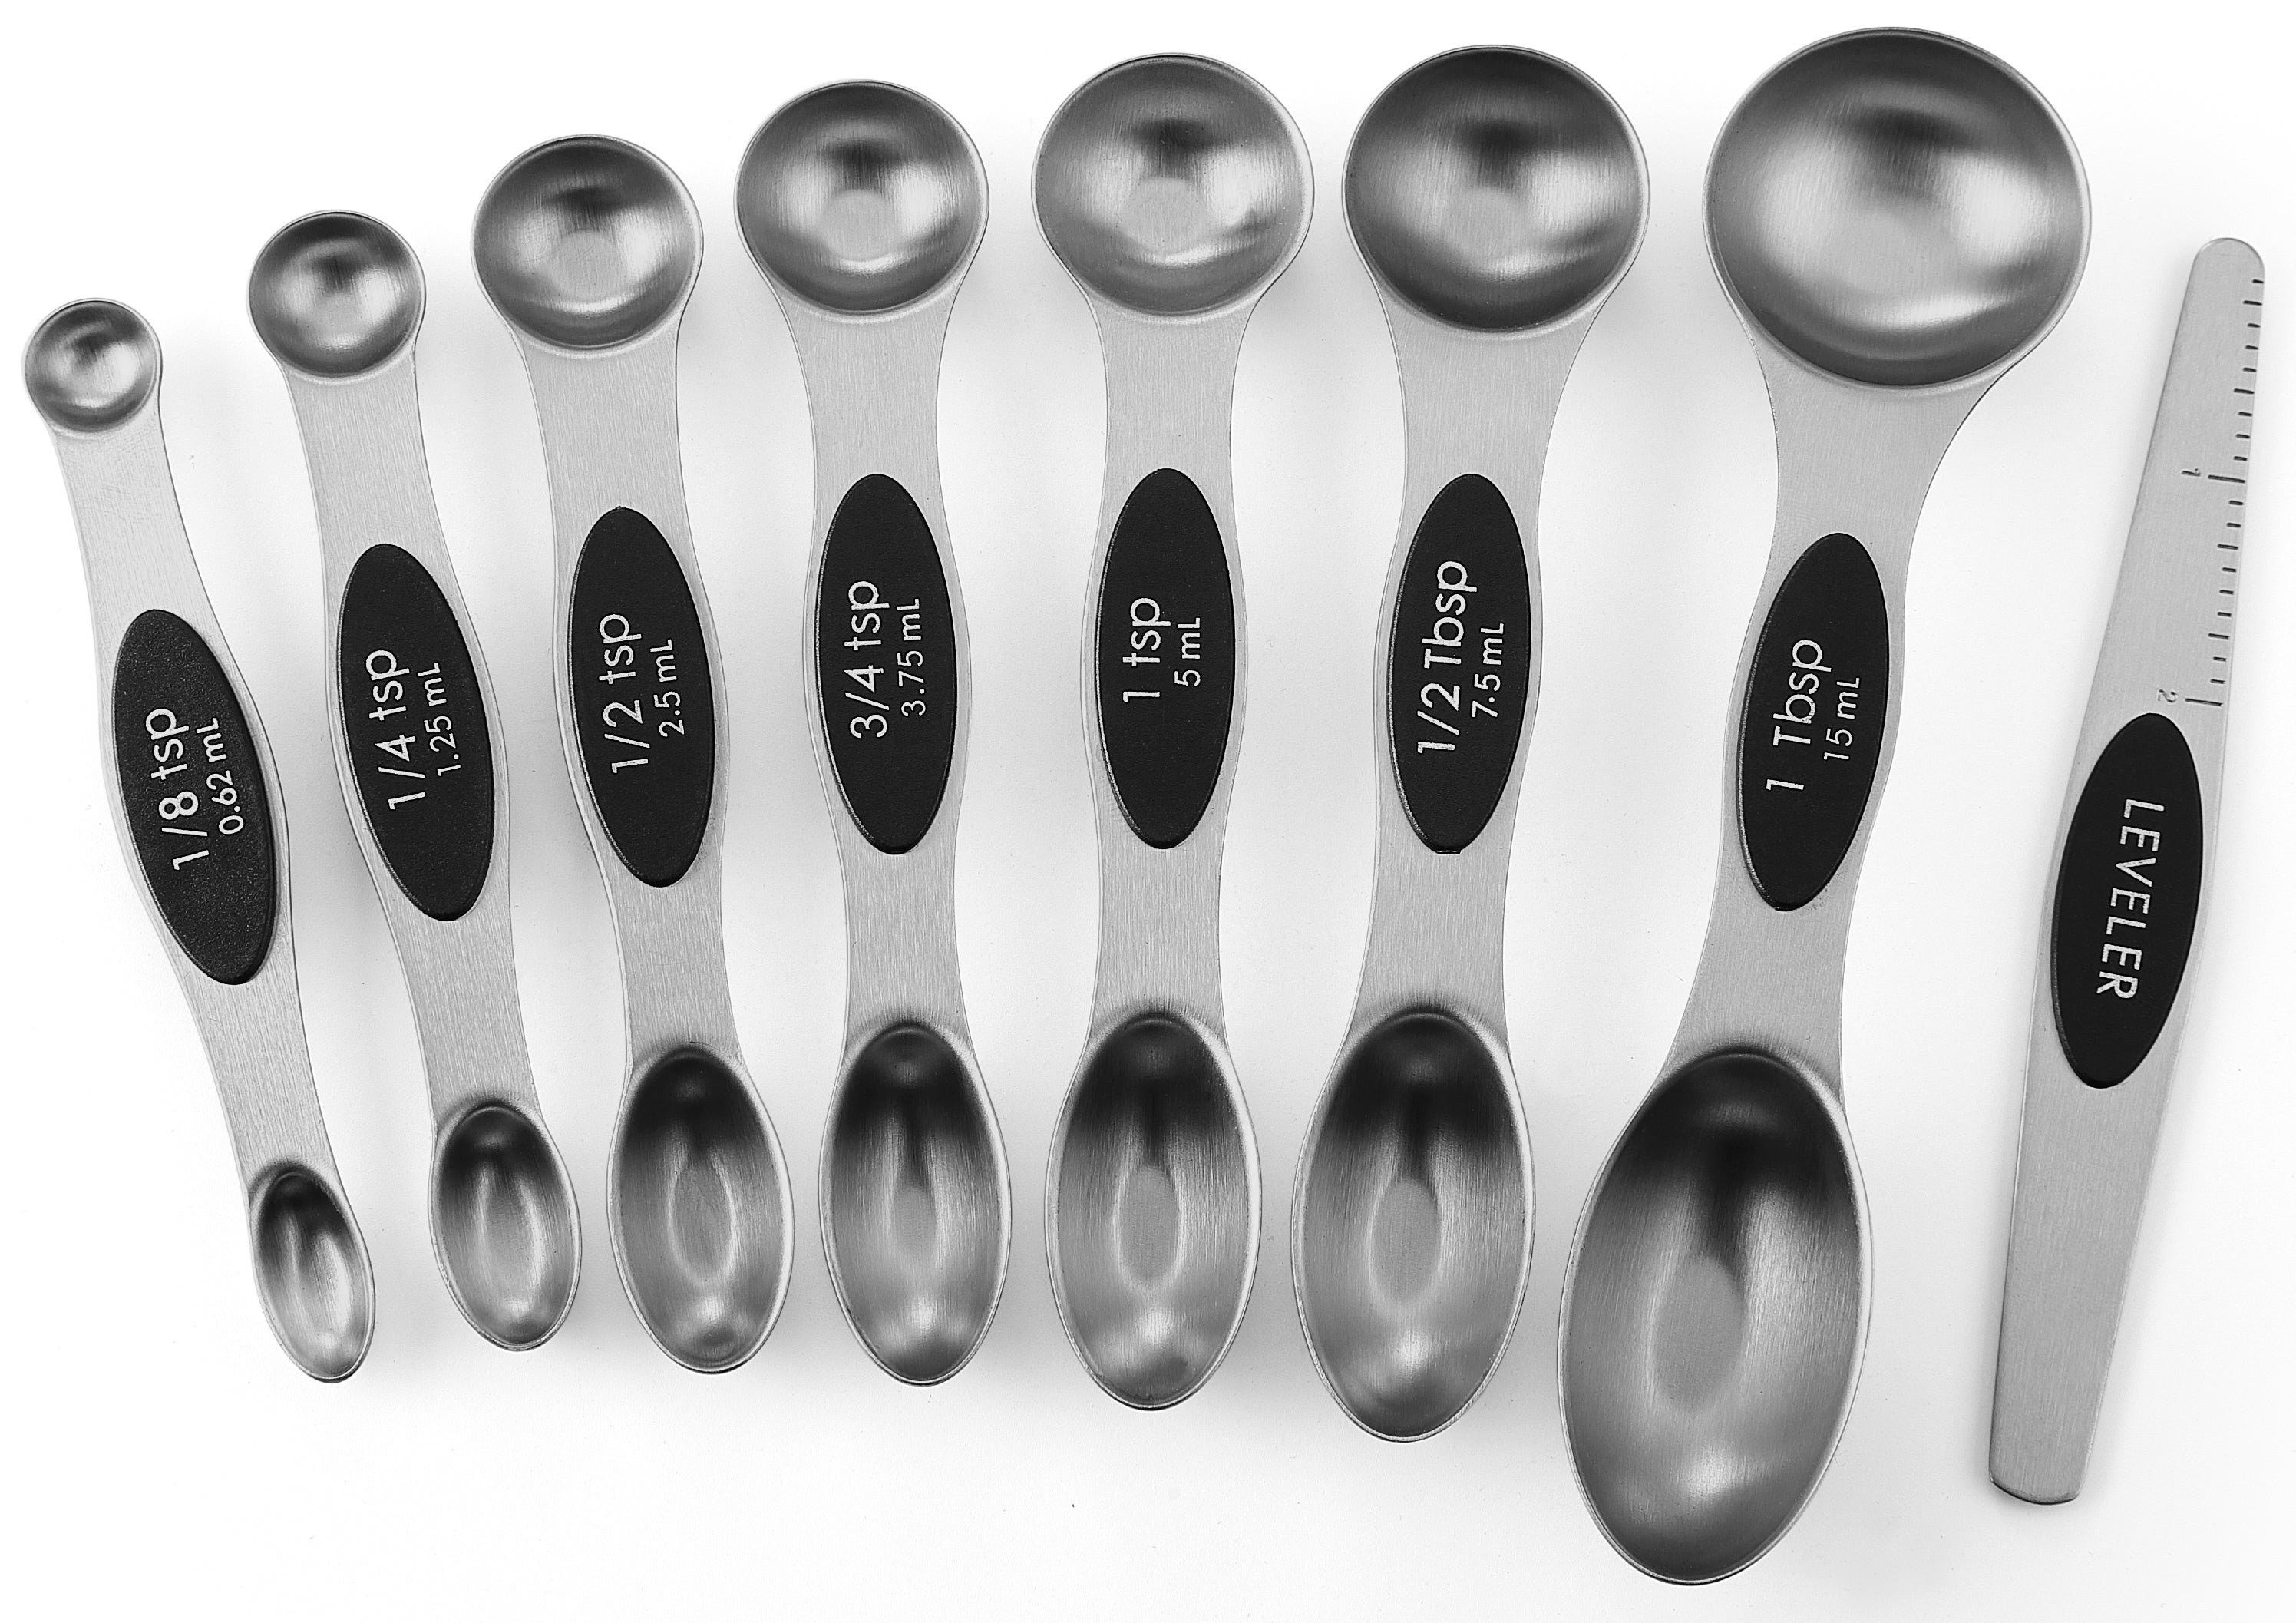 Spring Chef Stainless Steel Measuring Cups and Spoons, Set of 15 & Set of 3  Cutting Boards for Kitchen With Soft Grip Handles, Black - 2 Product